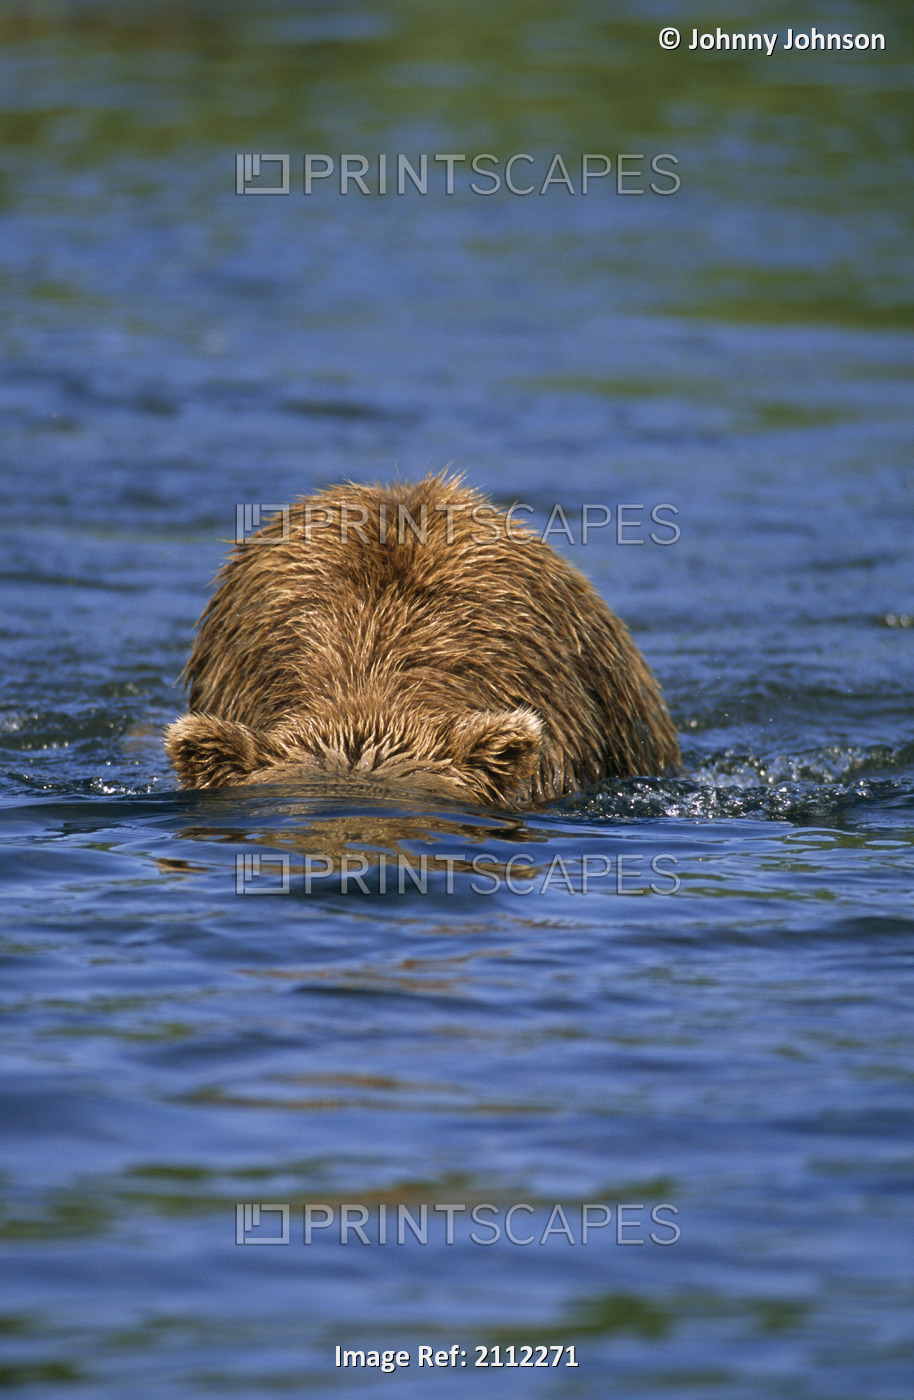 Grizzly Fishing For Salmon By Looking Underwater, Mikfik Creek, Mcneil River ...